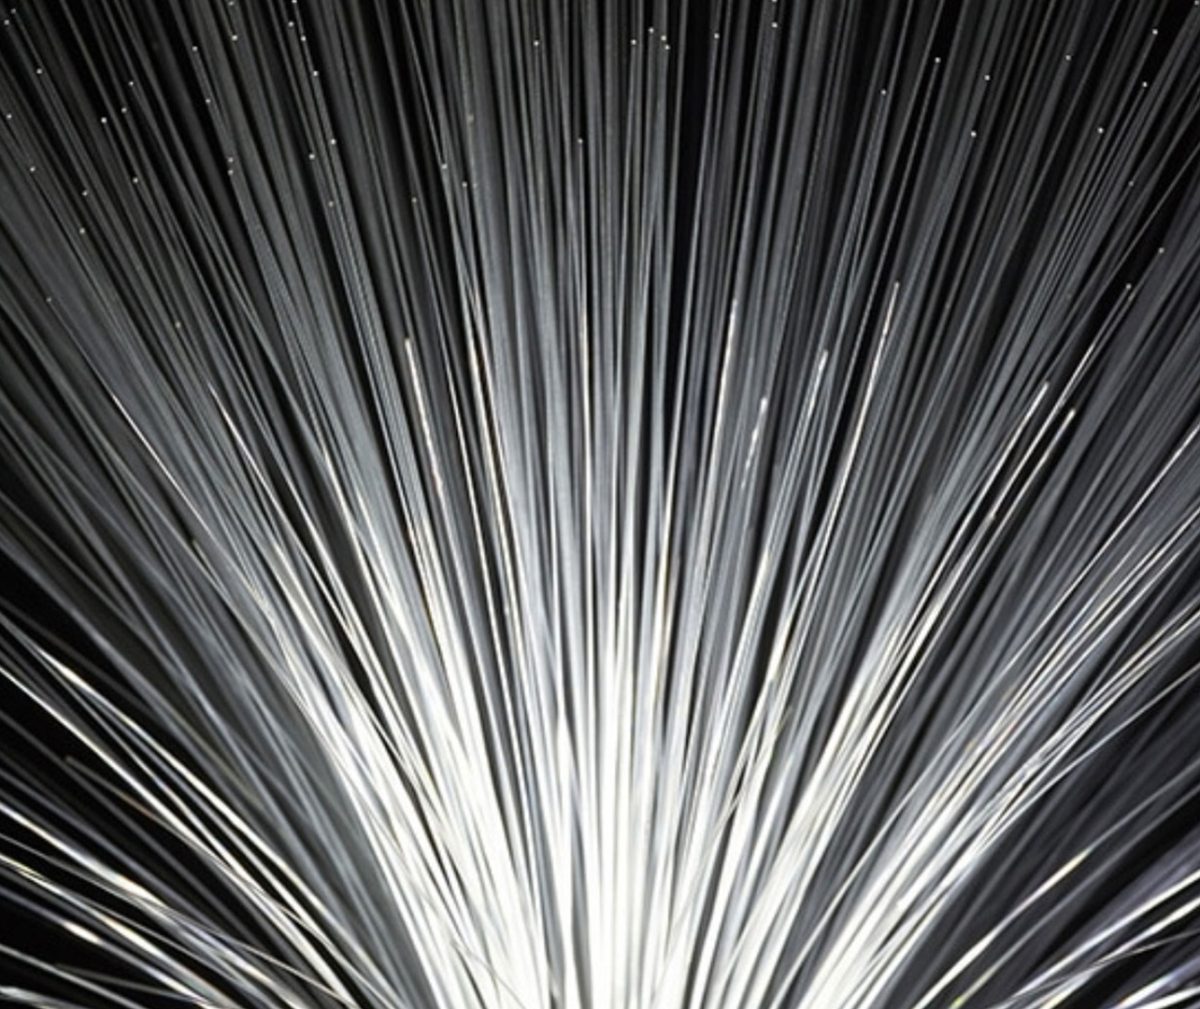 A close-up view of numerous thin, light-emitting fiber optic strands fanned out in all directions.